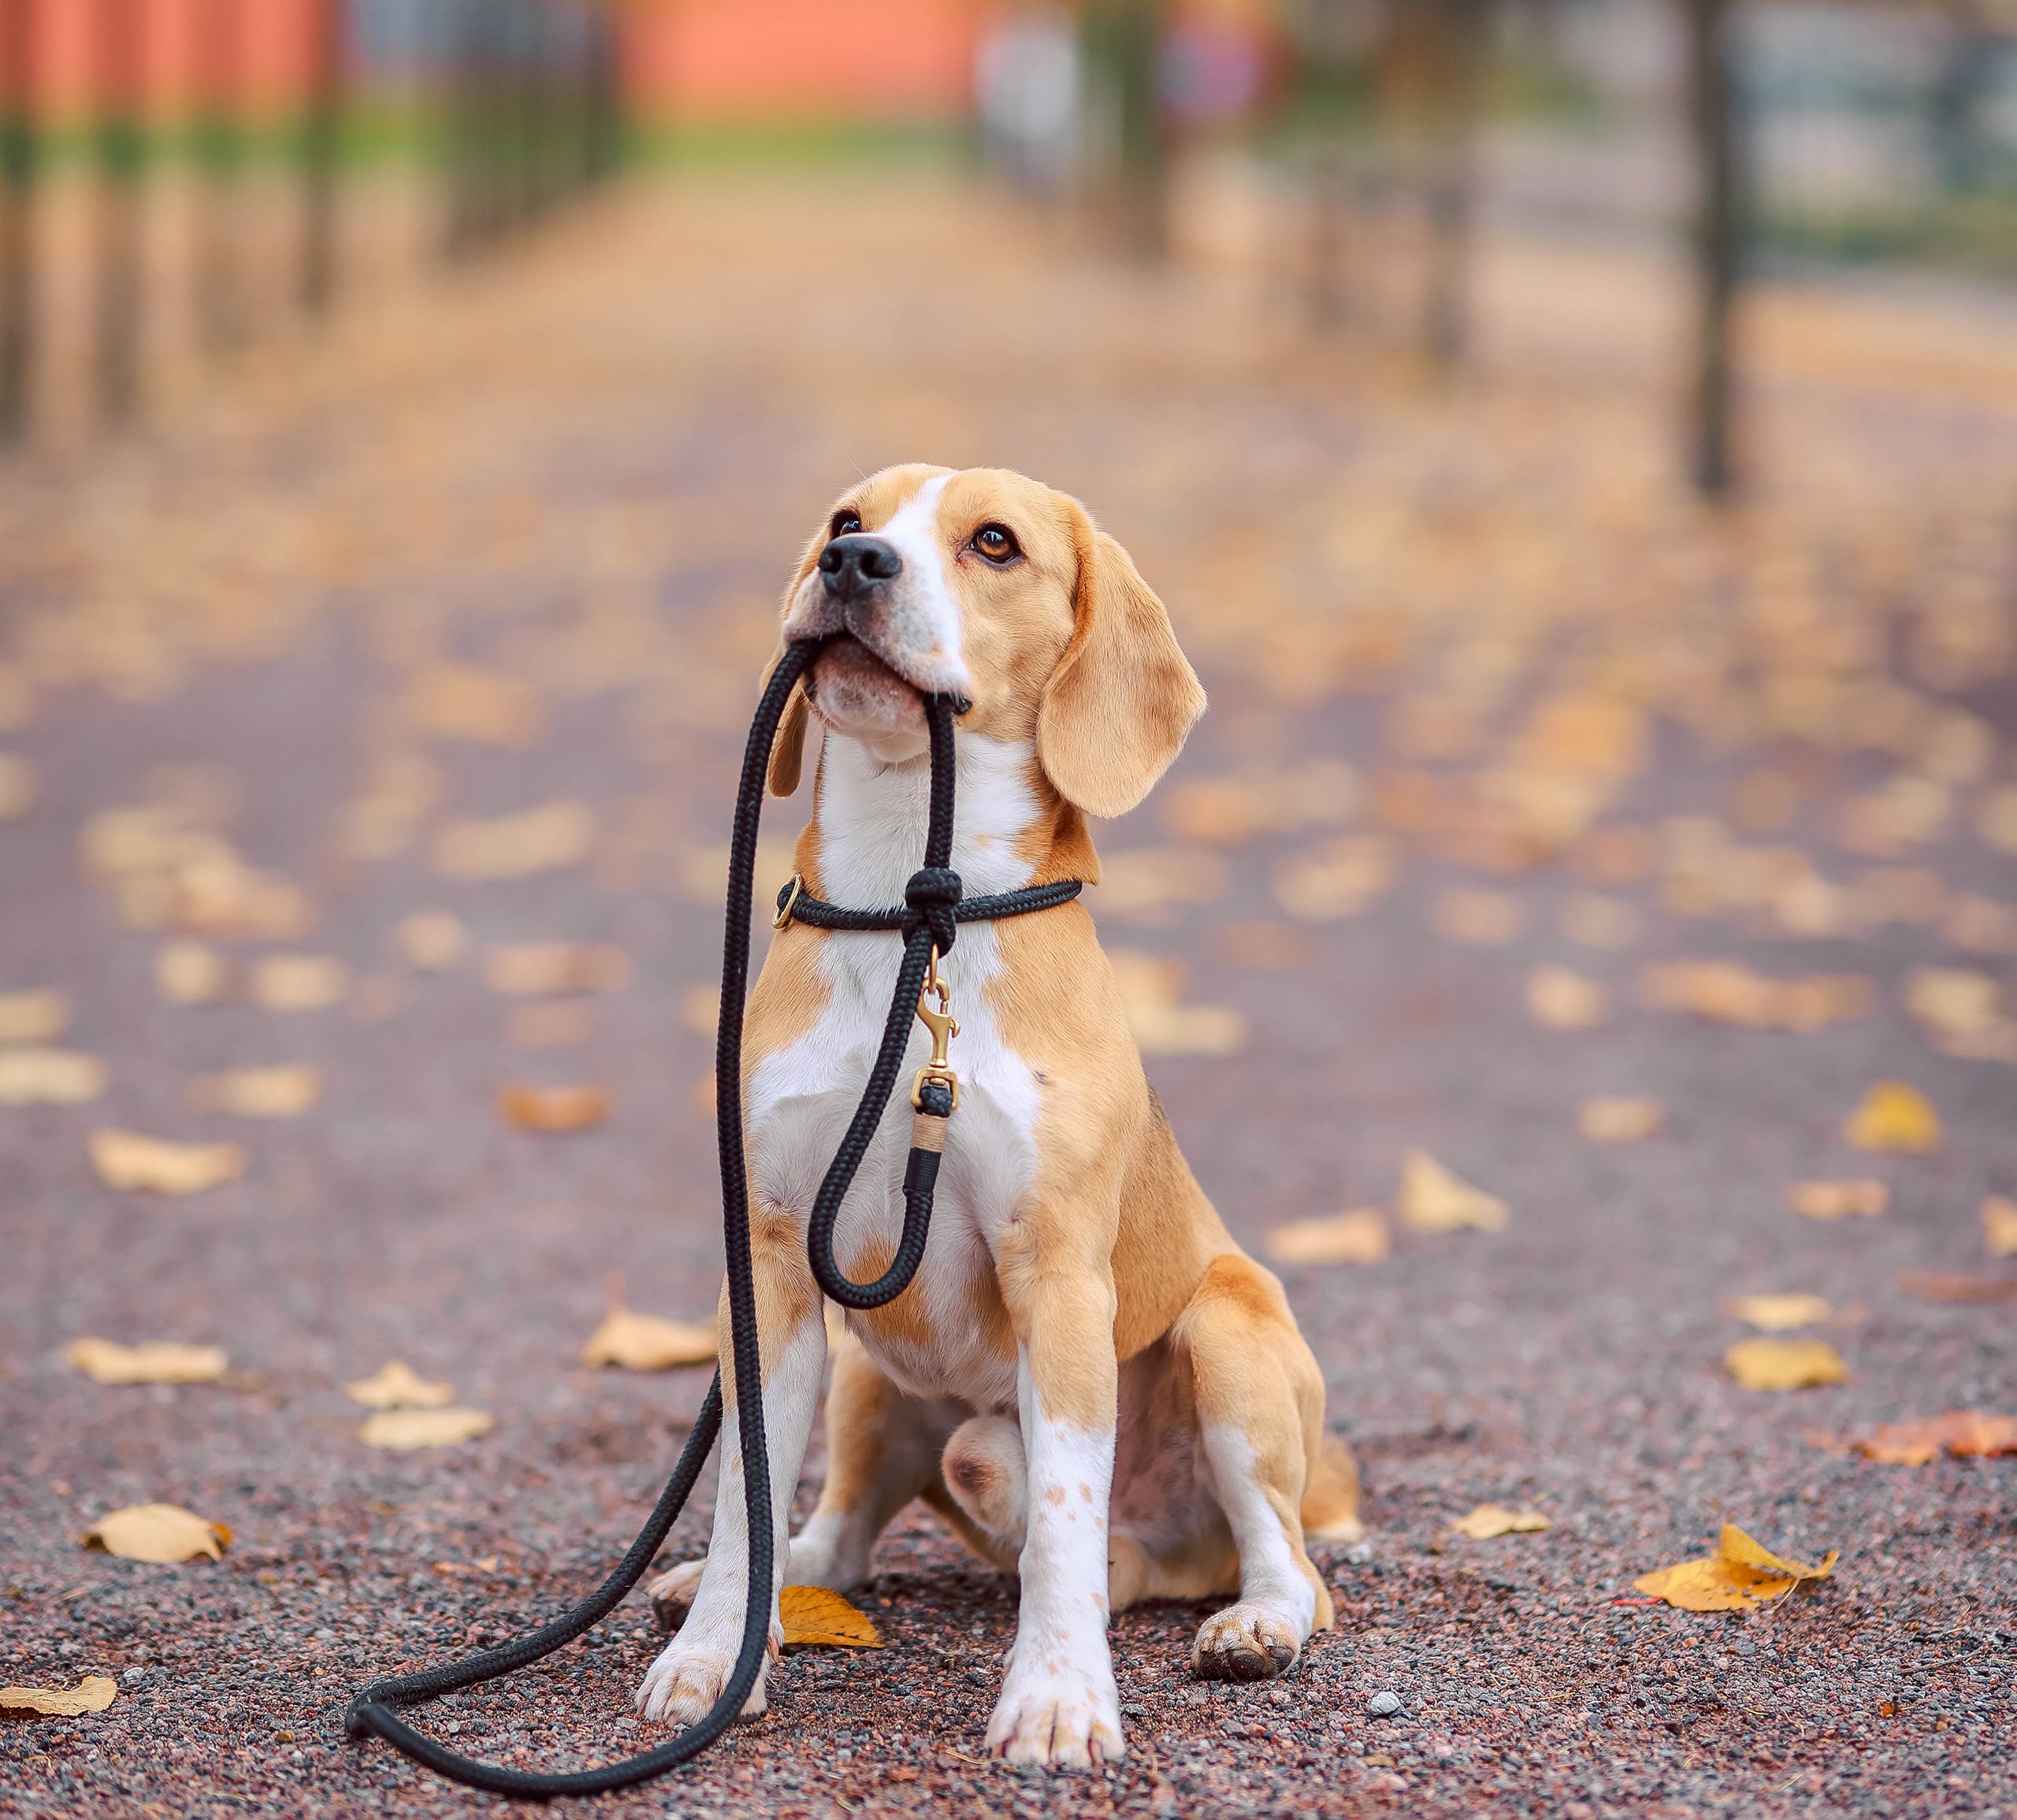 Loyal dog holding its leash amidst a road covered in autumn leaves, epitomizing Grapevine Placements Agency's pet sitting services ensuring love and care for pets in the absence of their owners